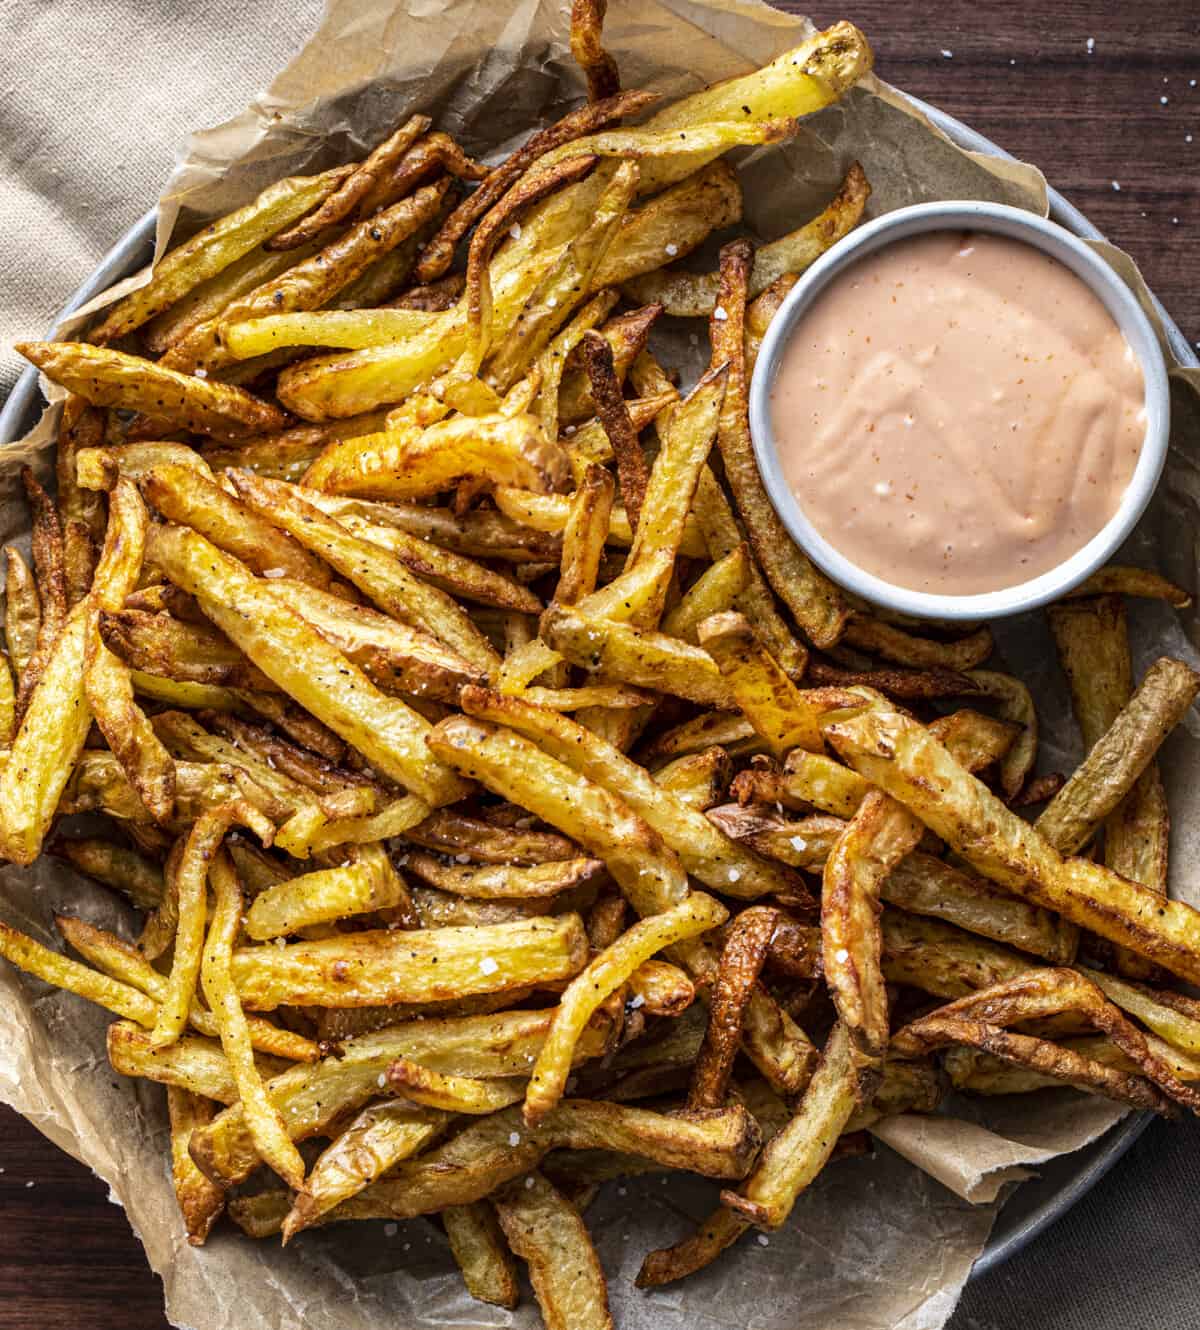 Plate of Air Fryer French Fries with Fry Sauce. Appetizer, French Fries, Air Fryer Recipes, How to Make French Fries, Side Dish, What to Serve with Burgers, i am homesteader, iamhomesteader